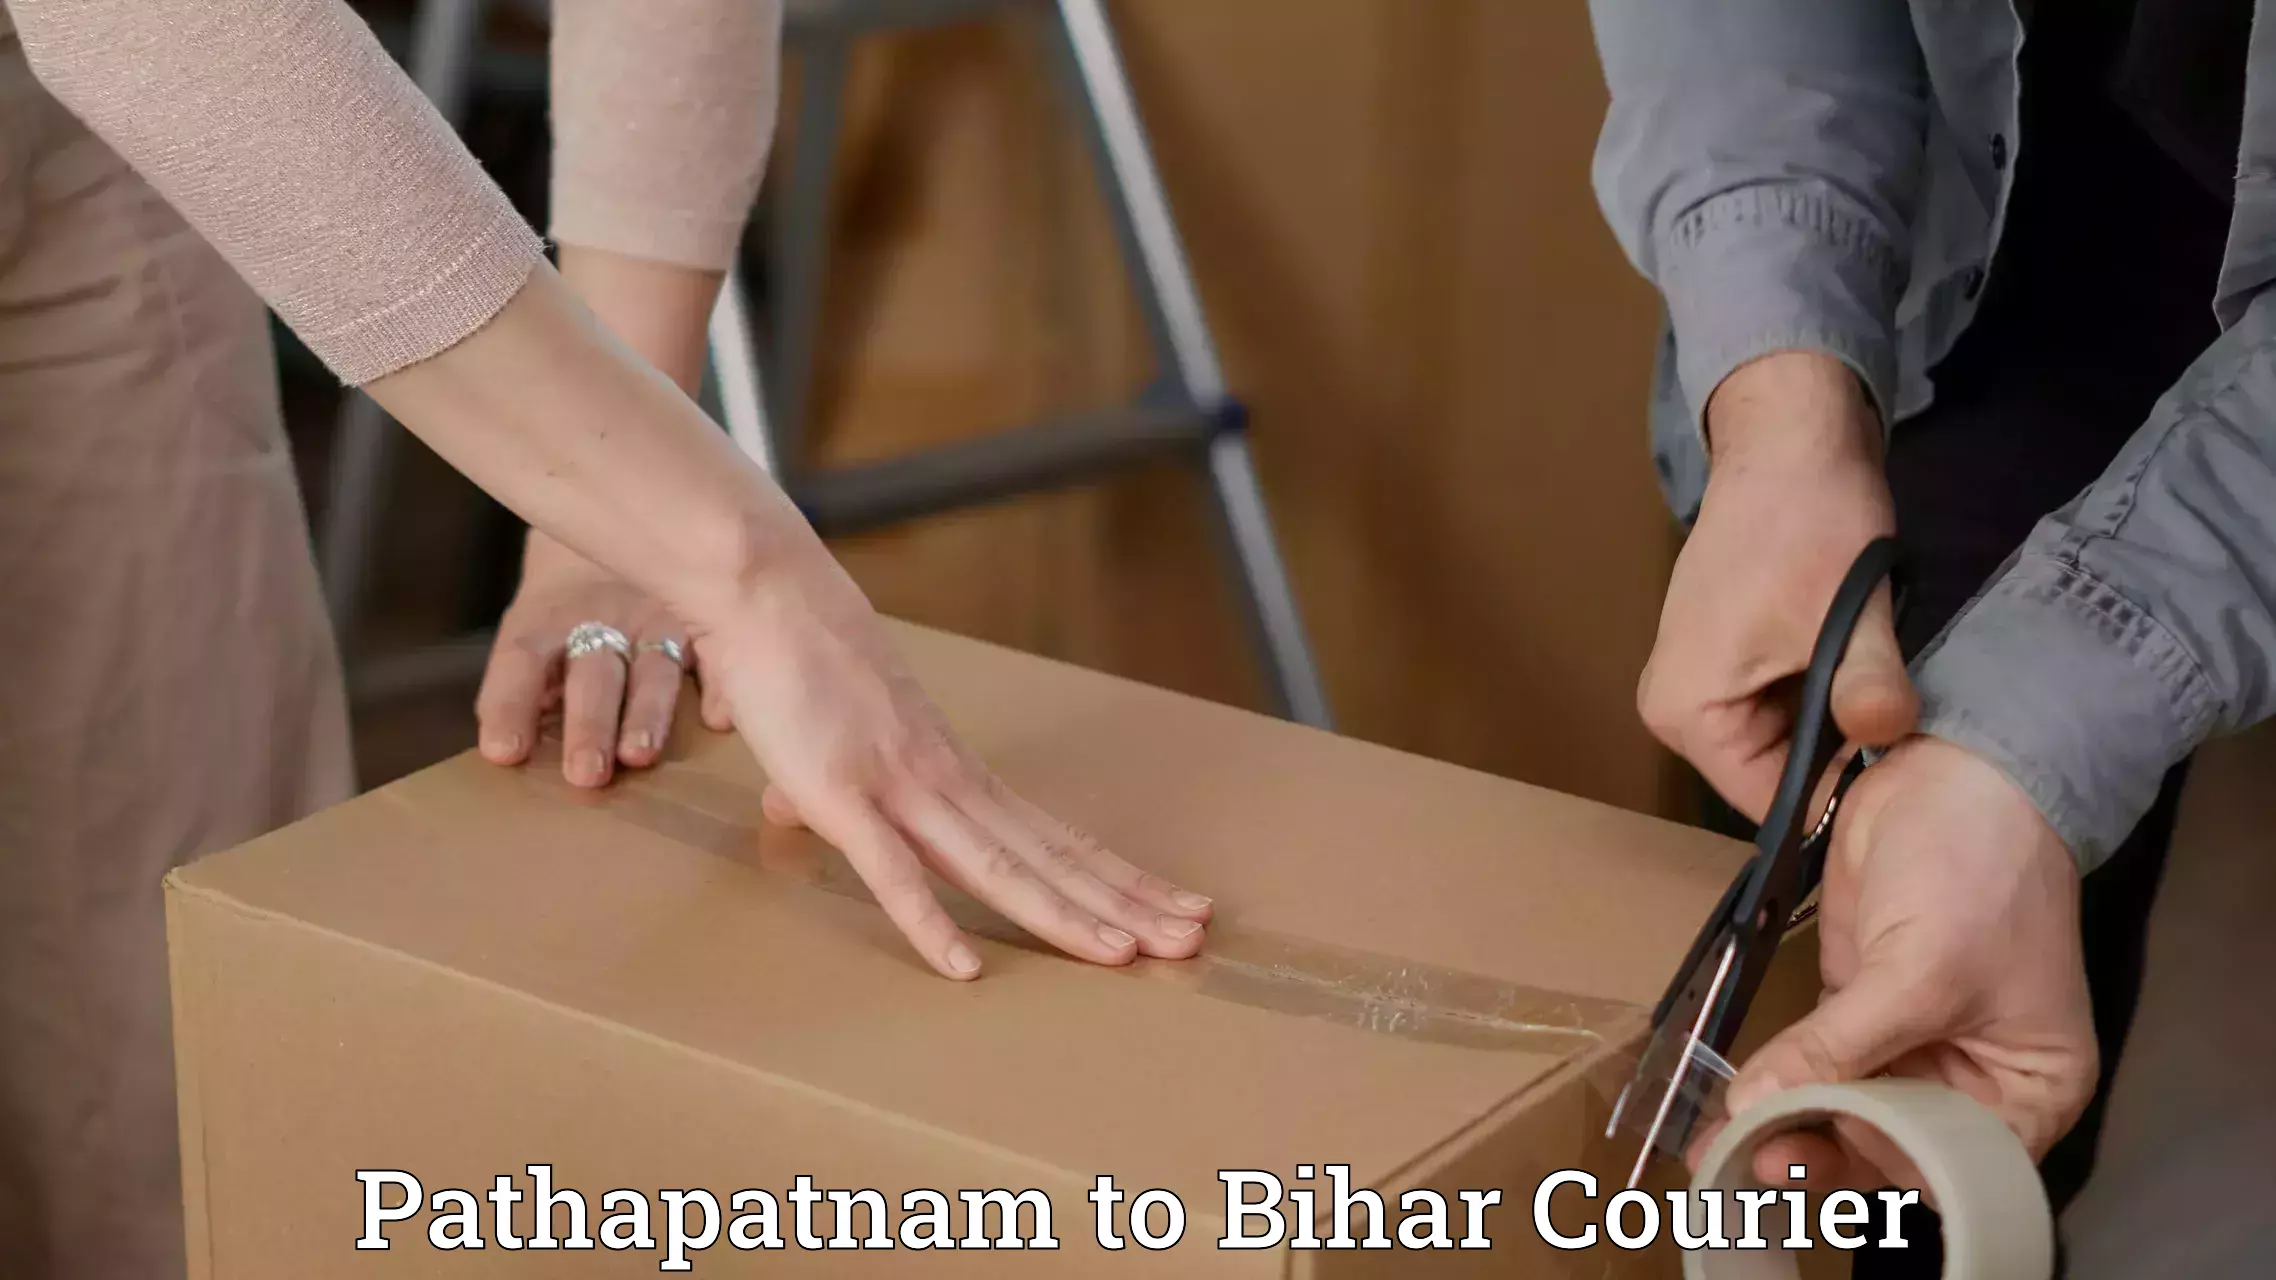 Courier insurance in Pathapatnam to Sitamarhi